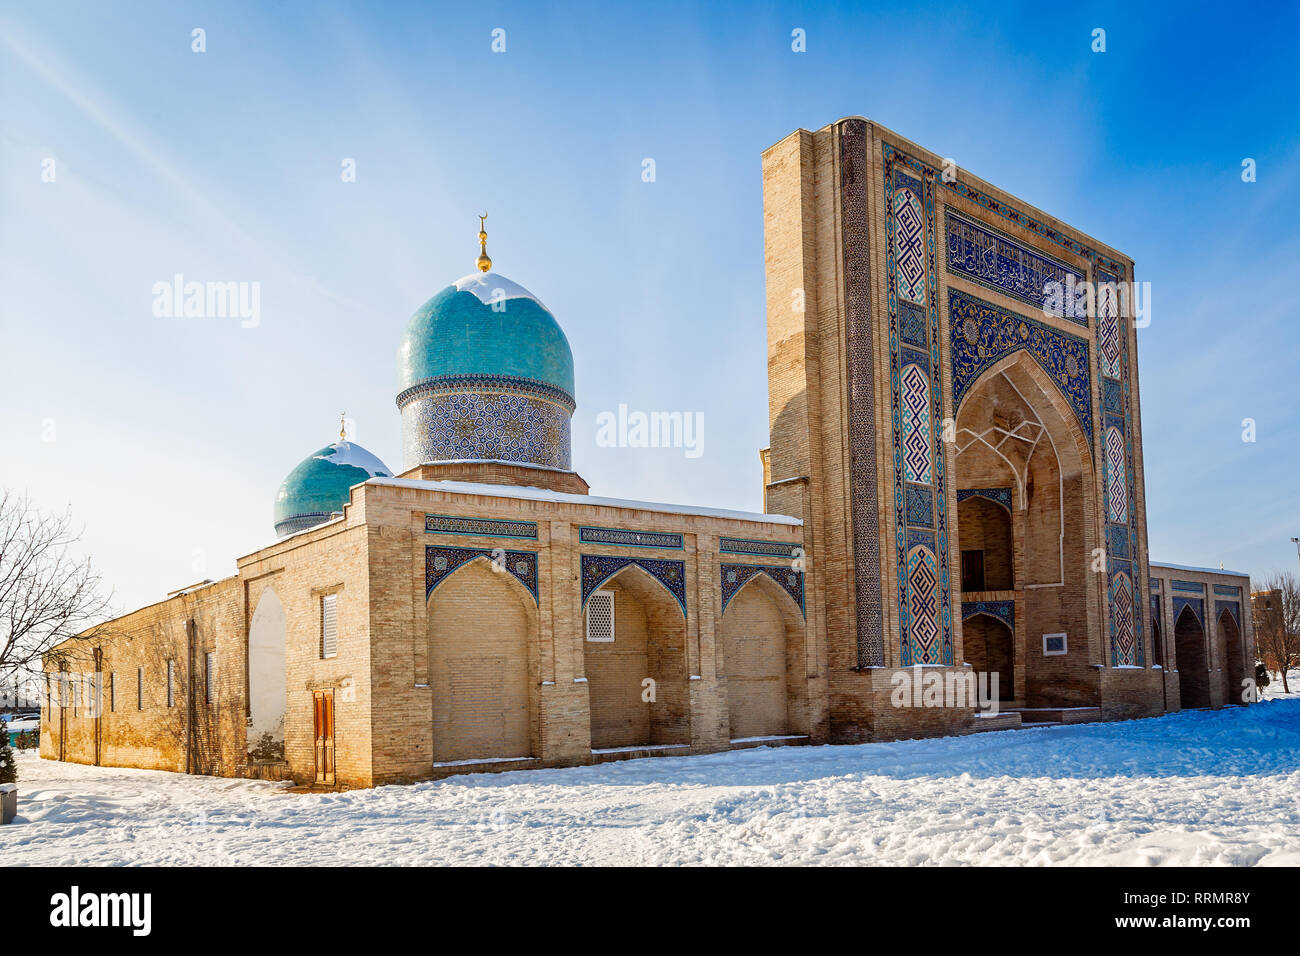 Decorated entrance and two domes of Hazrati Imam complex, religious center of Tashkent, winter time, Uzbekistan Stock Photo